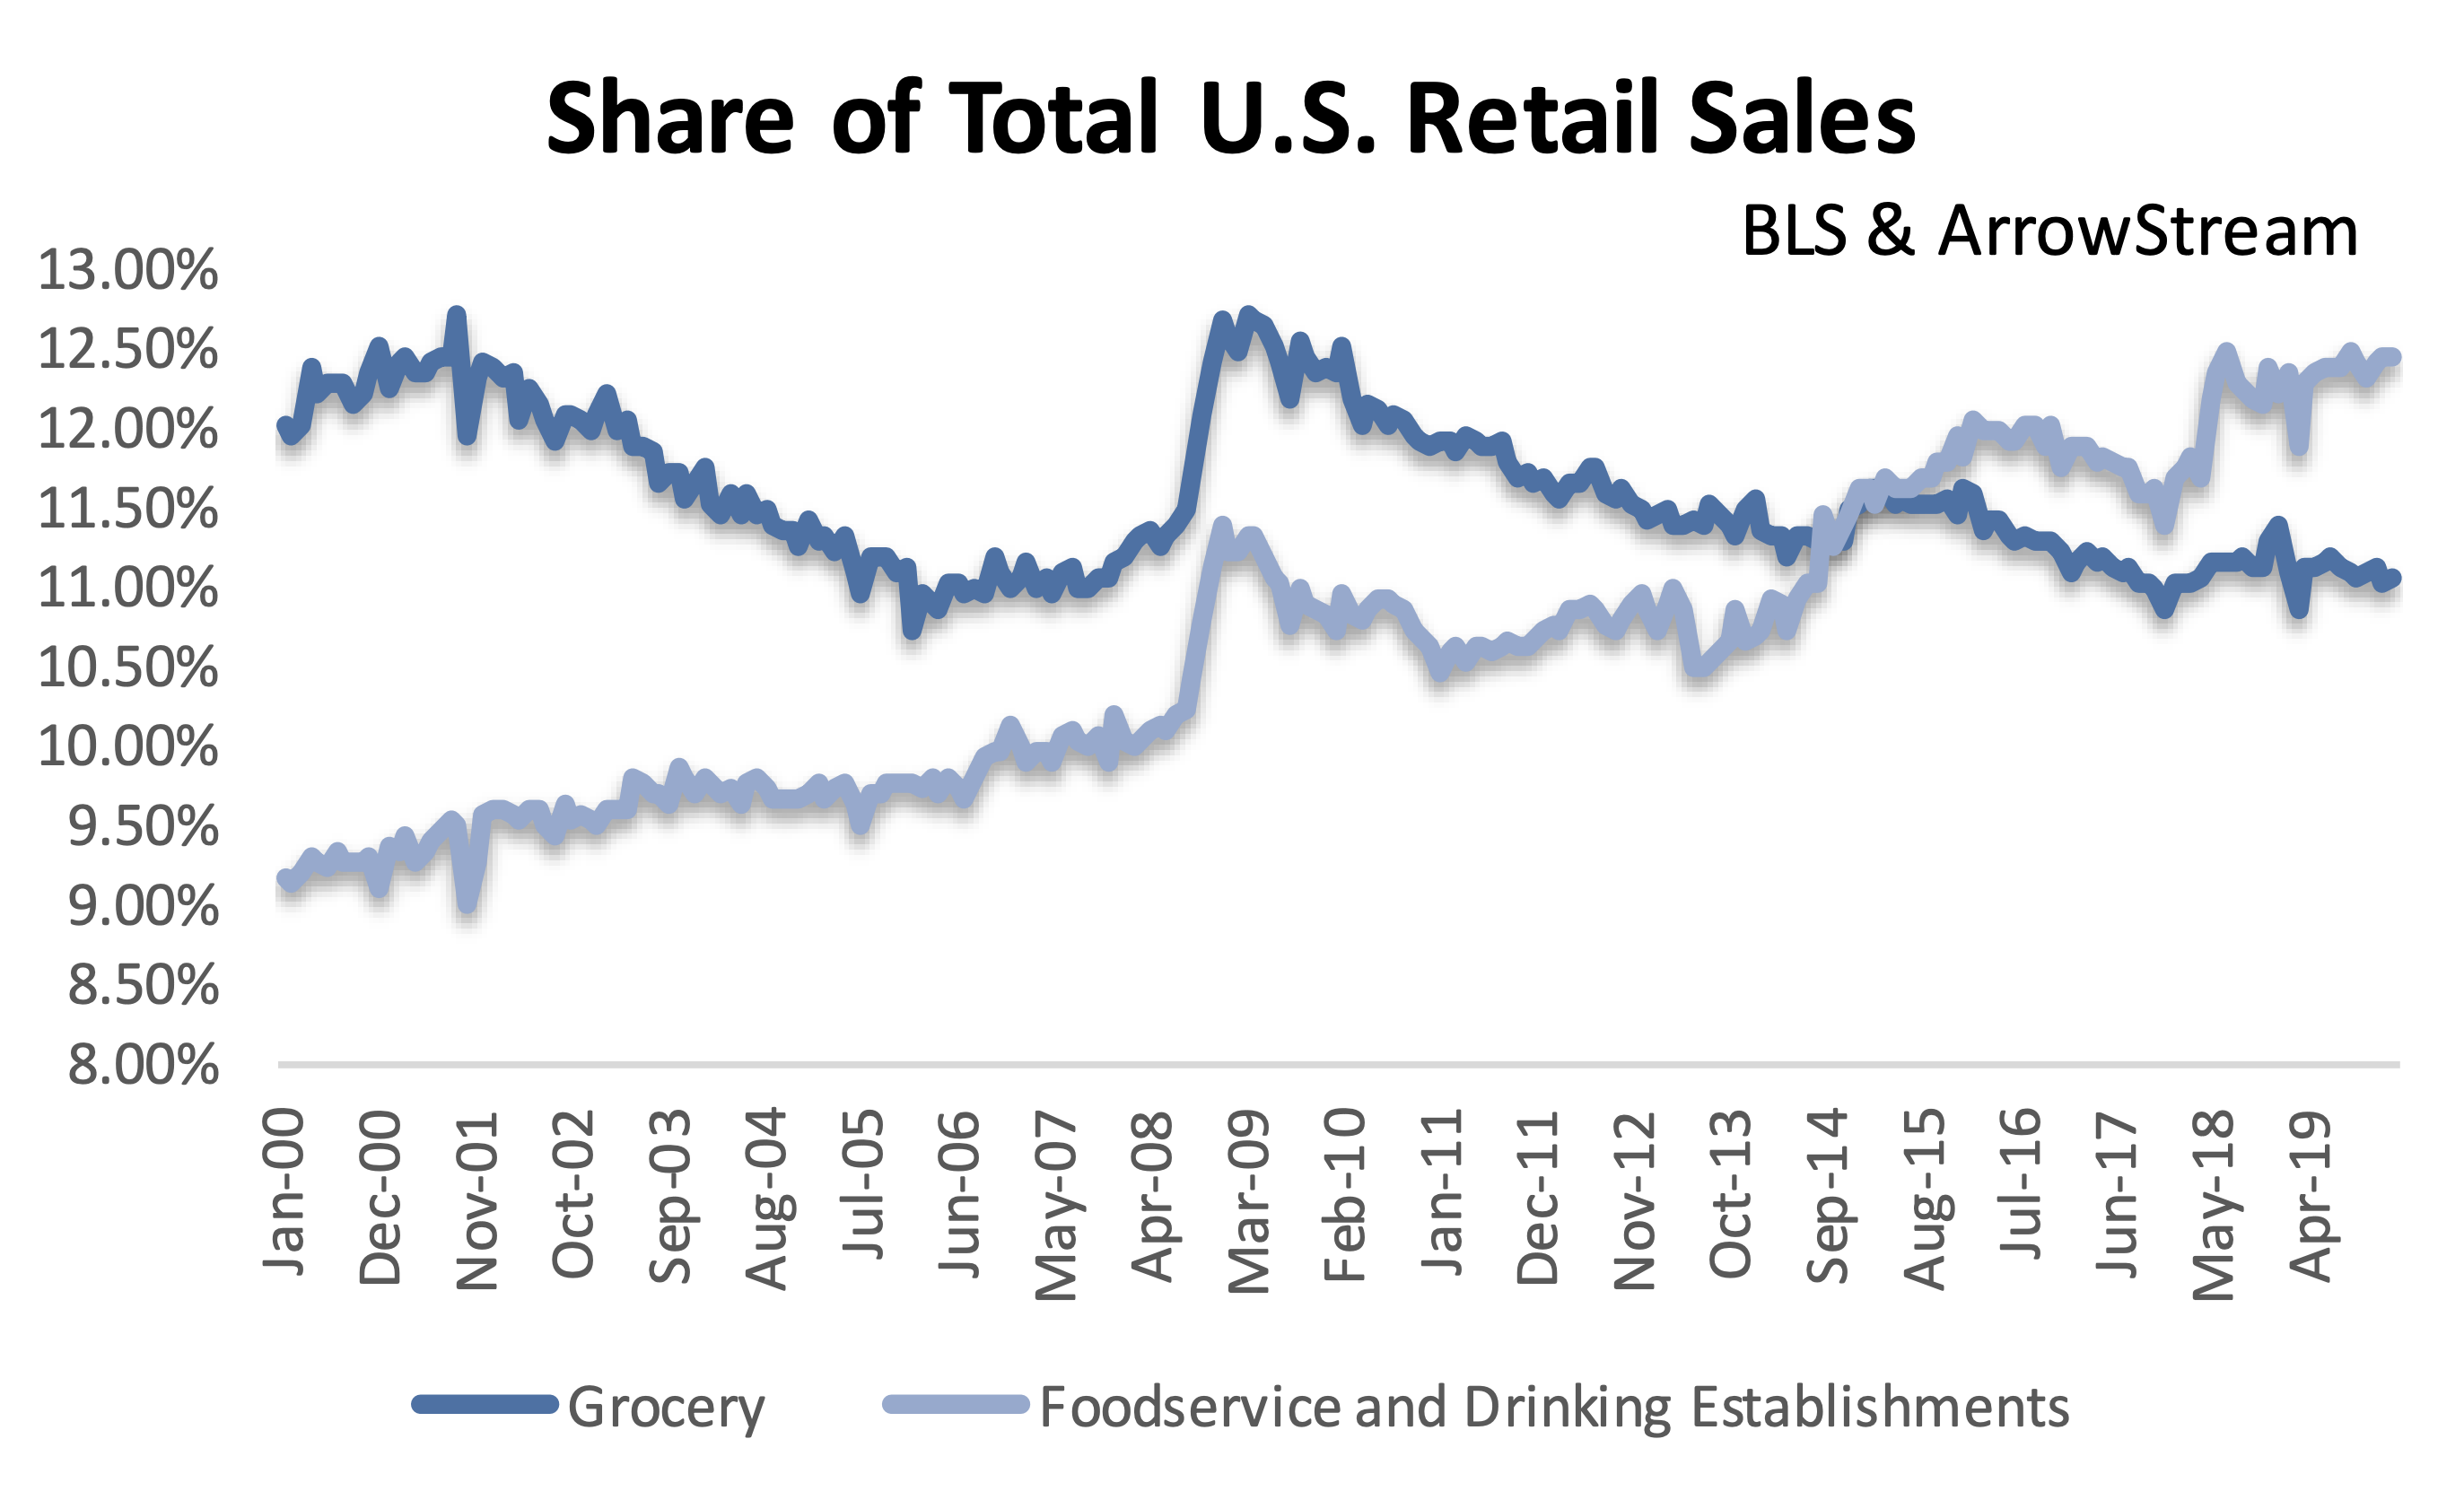 Restaurants the Third Largest Share of Retail Sales on Record